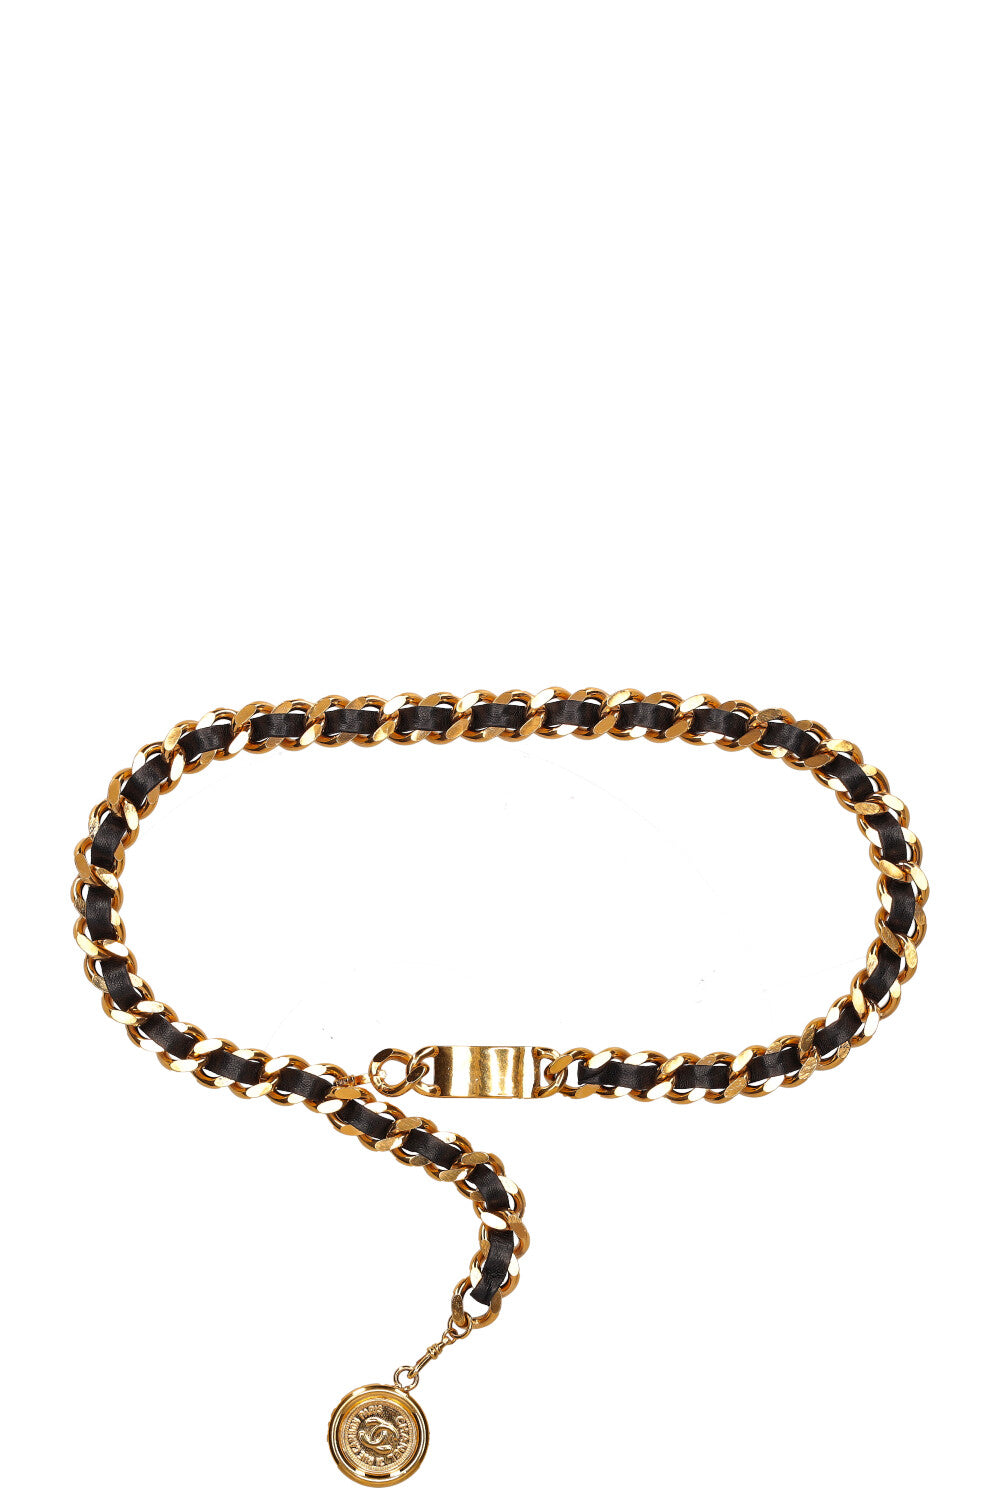 CHANEL Chain Belt with Plaquette and Medallion